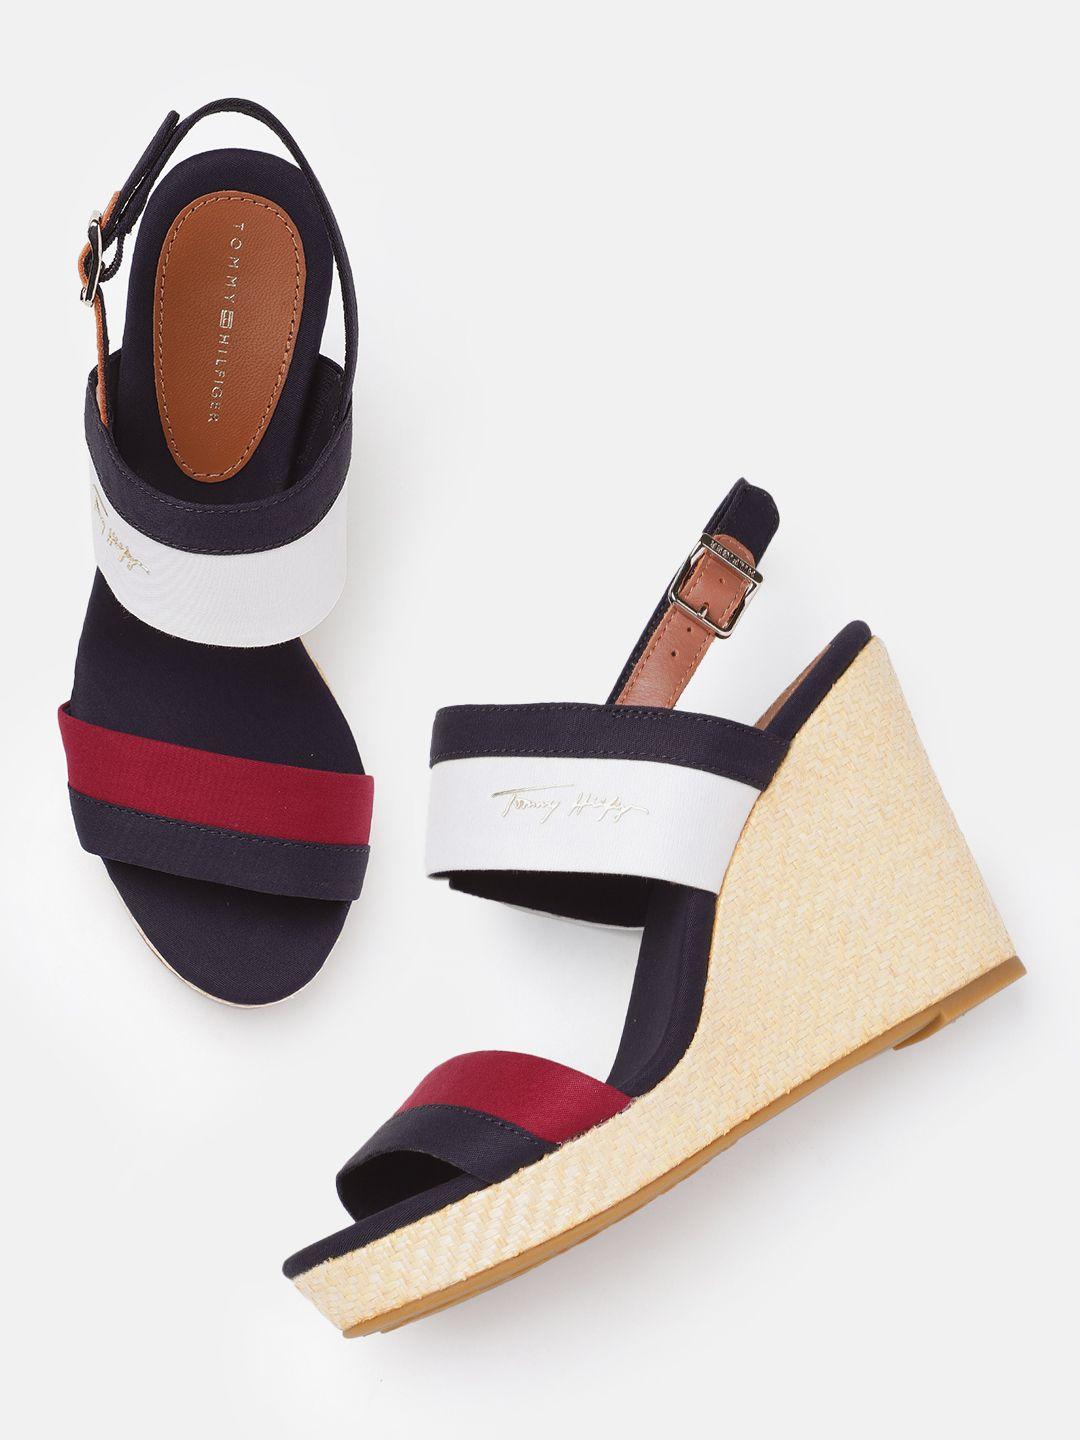 tommy hilfiger women colourblocked wedge sandals with buckle detail